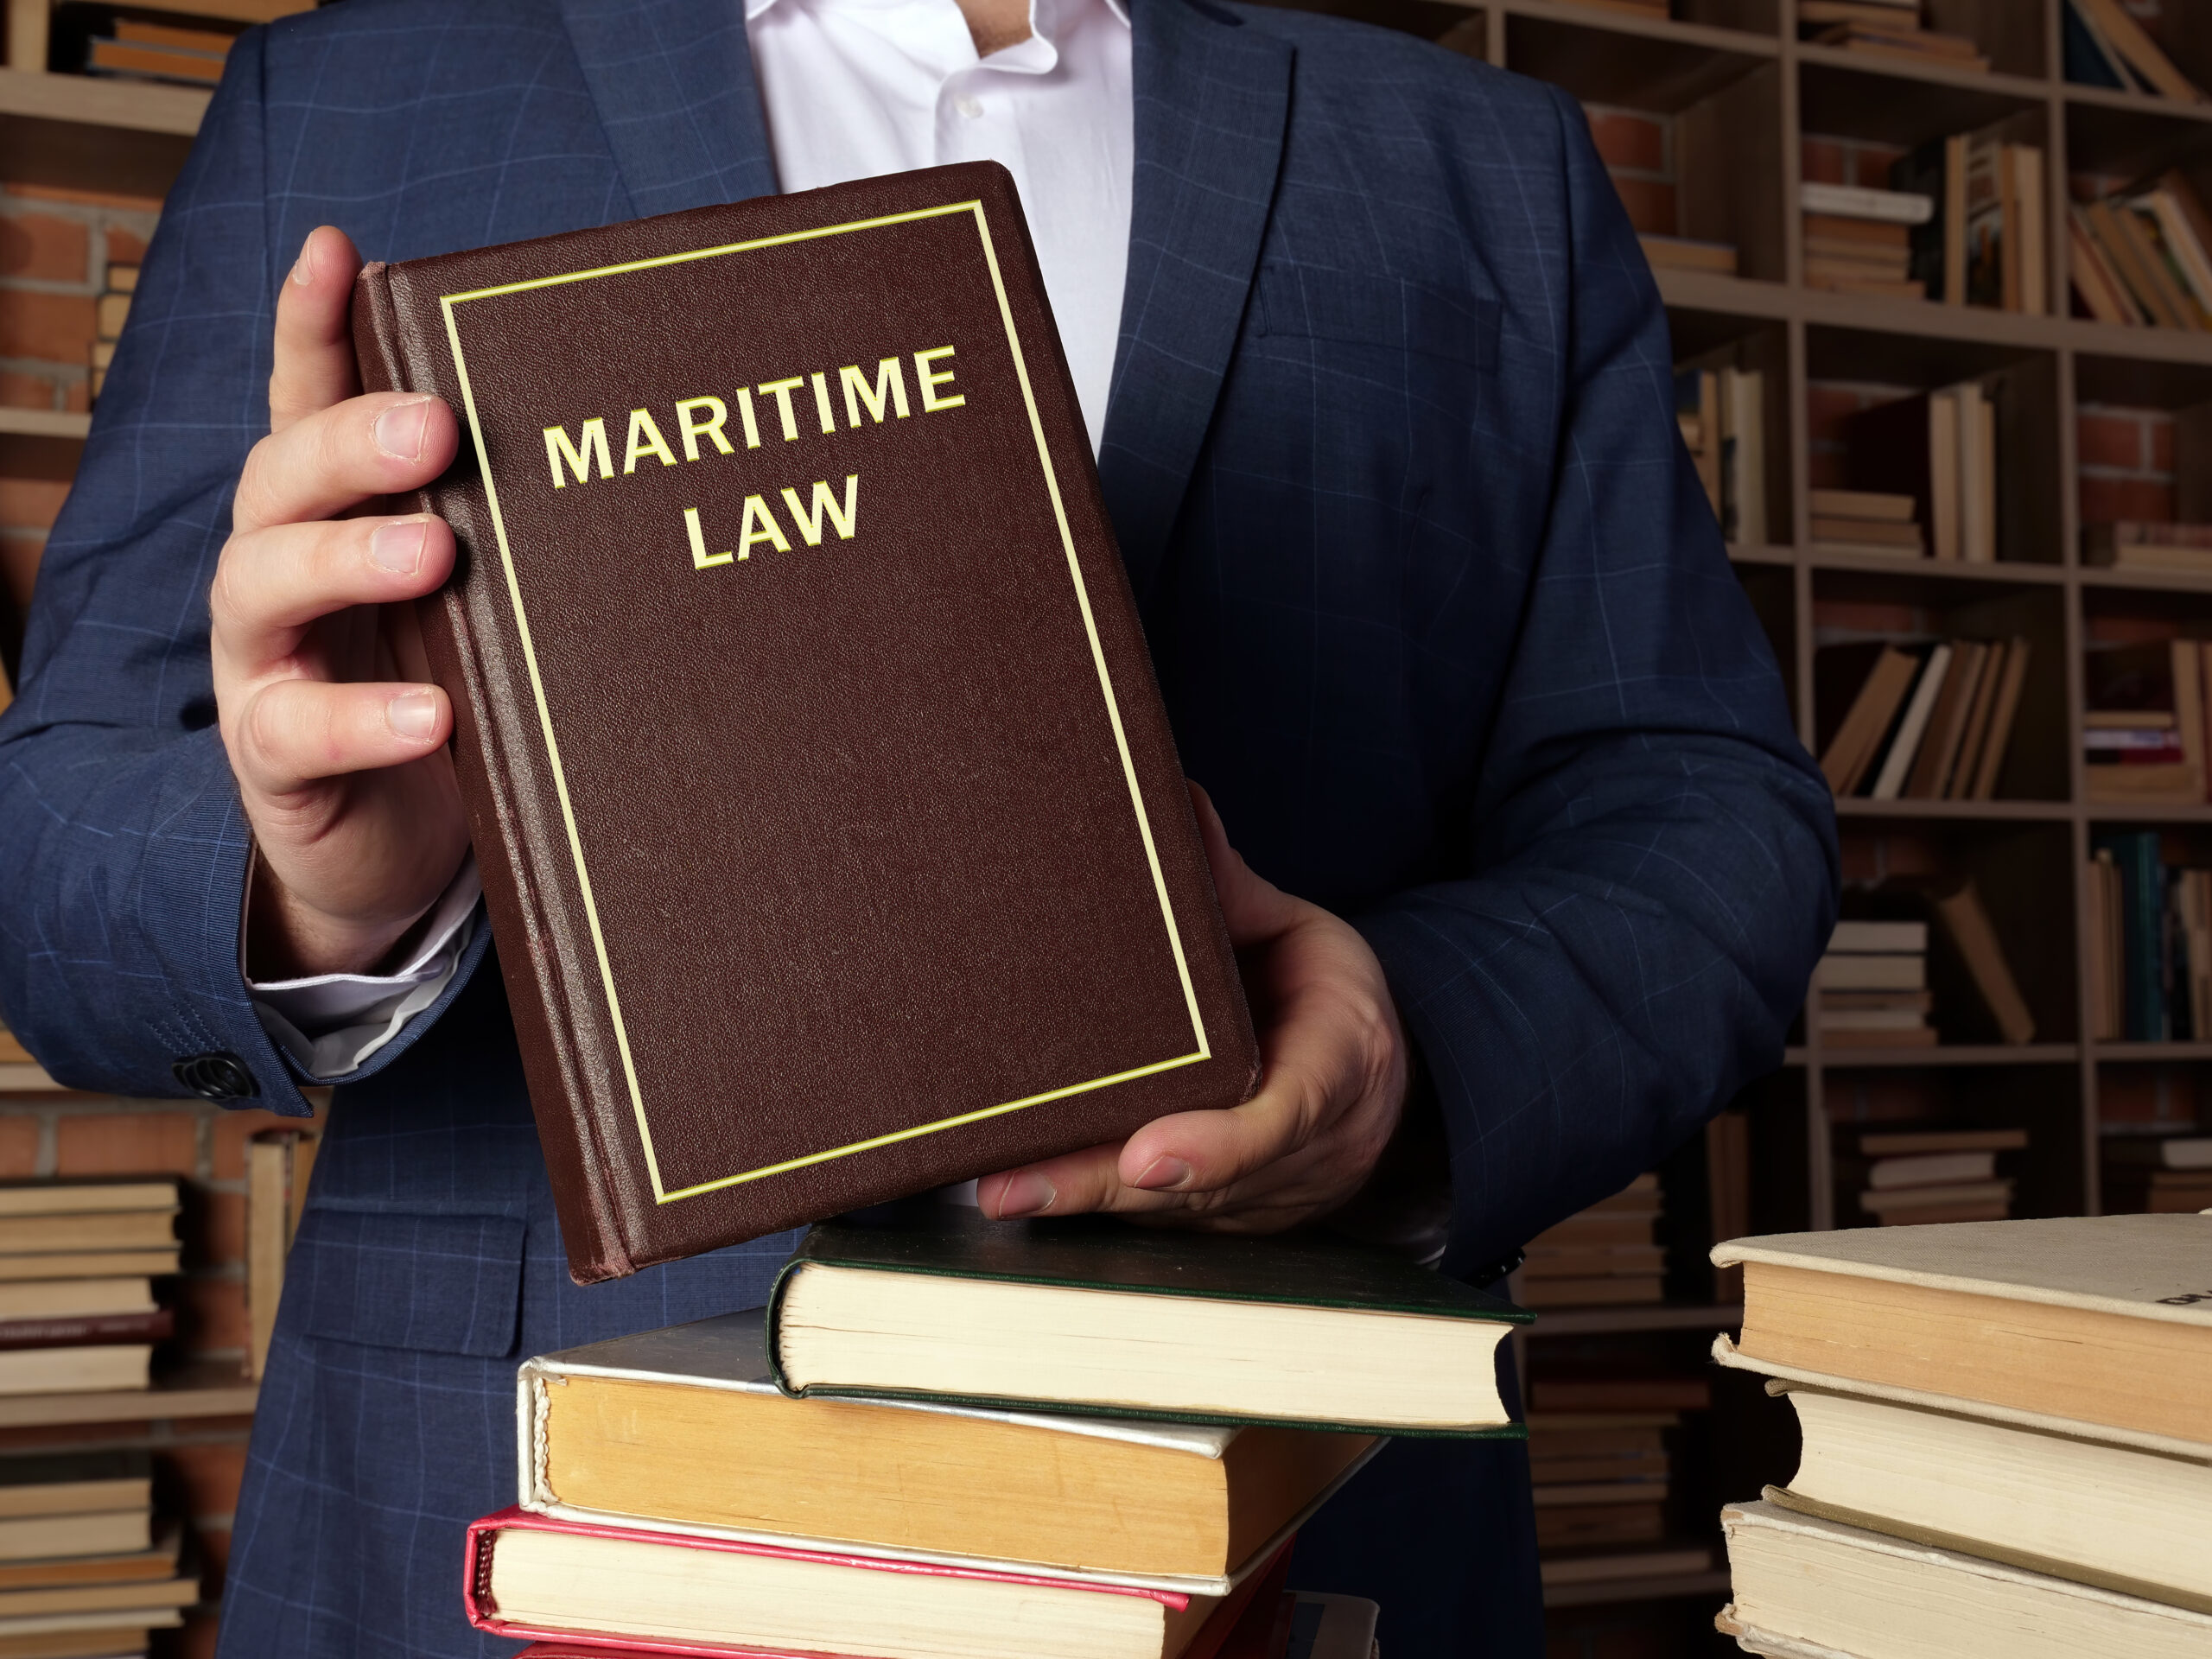 a law book being held may a man in a blue blazer with maritime law written on the cover